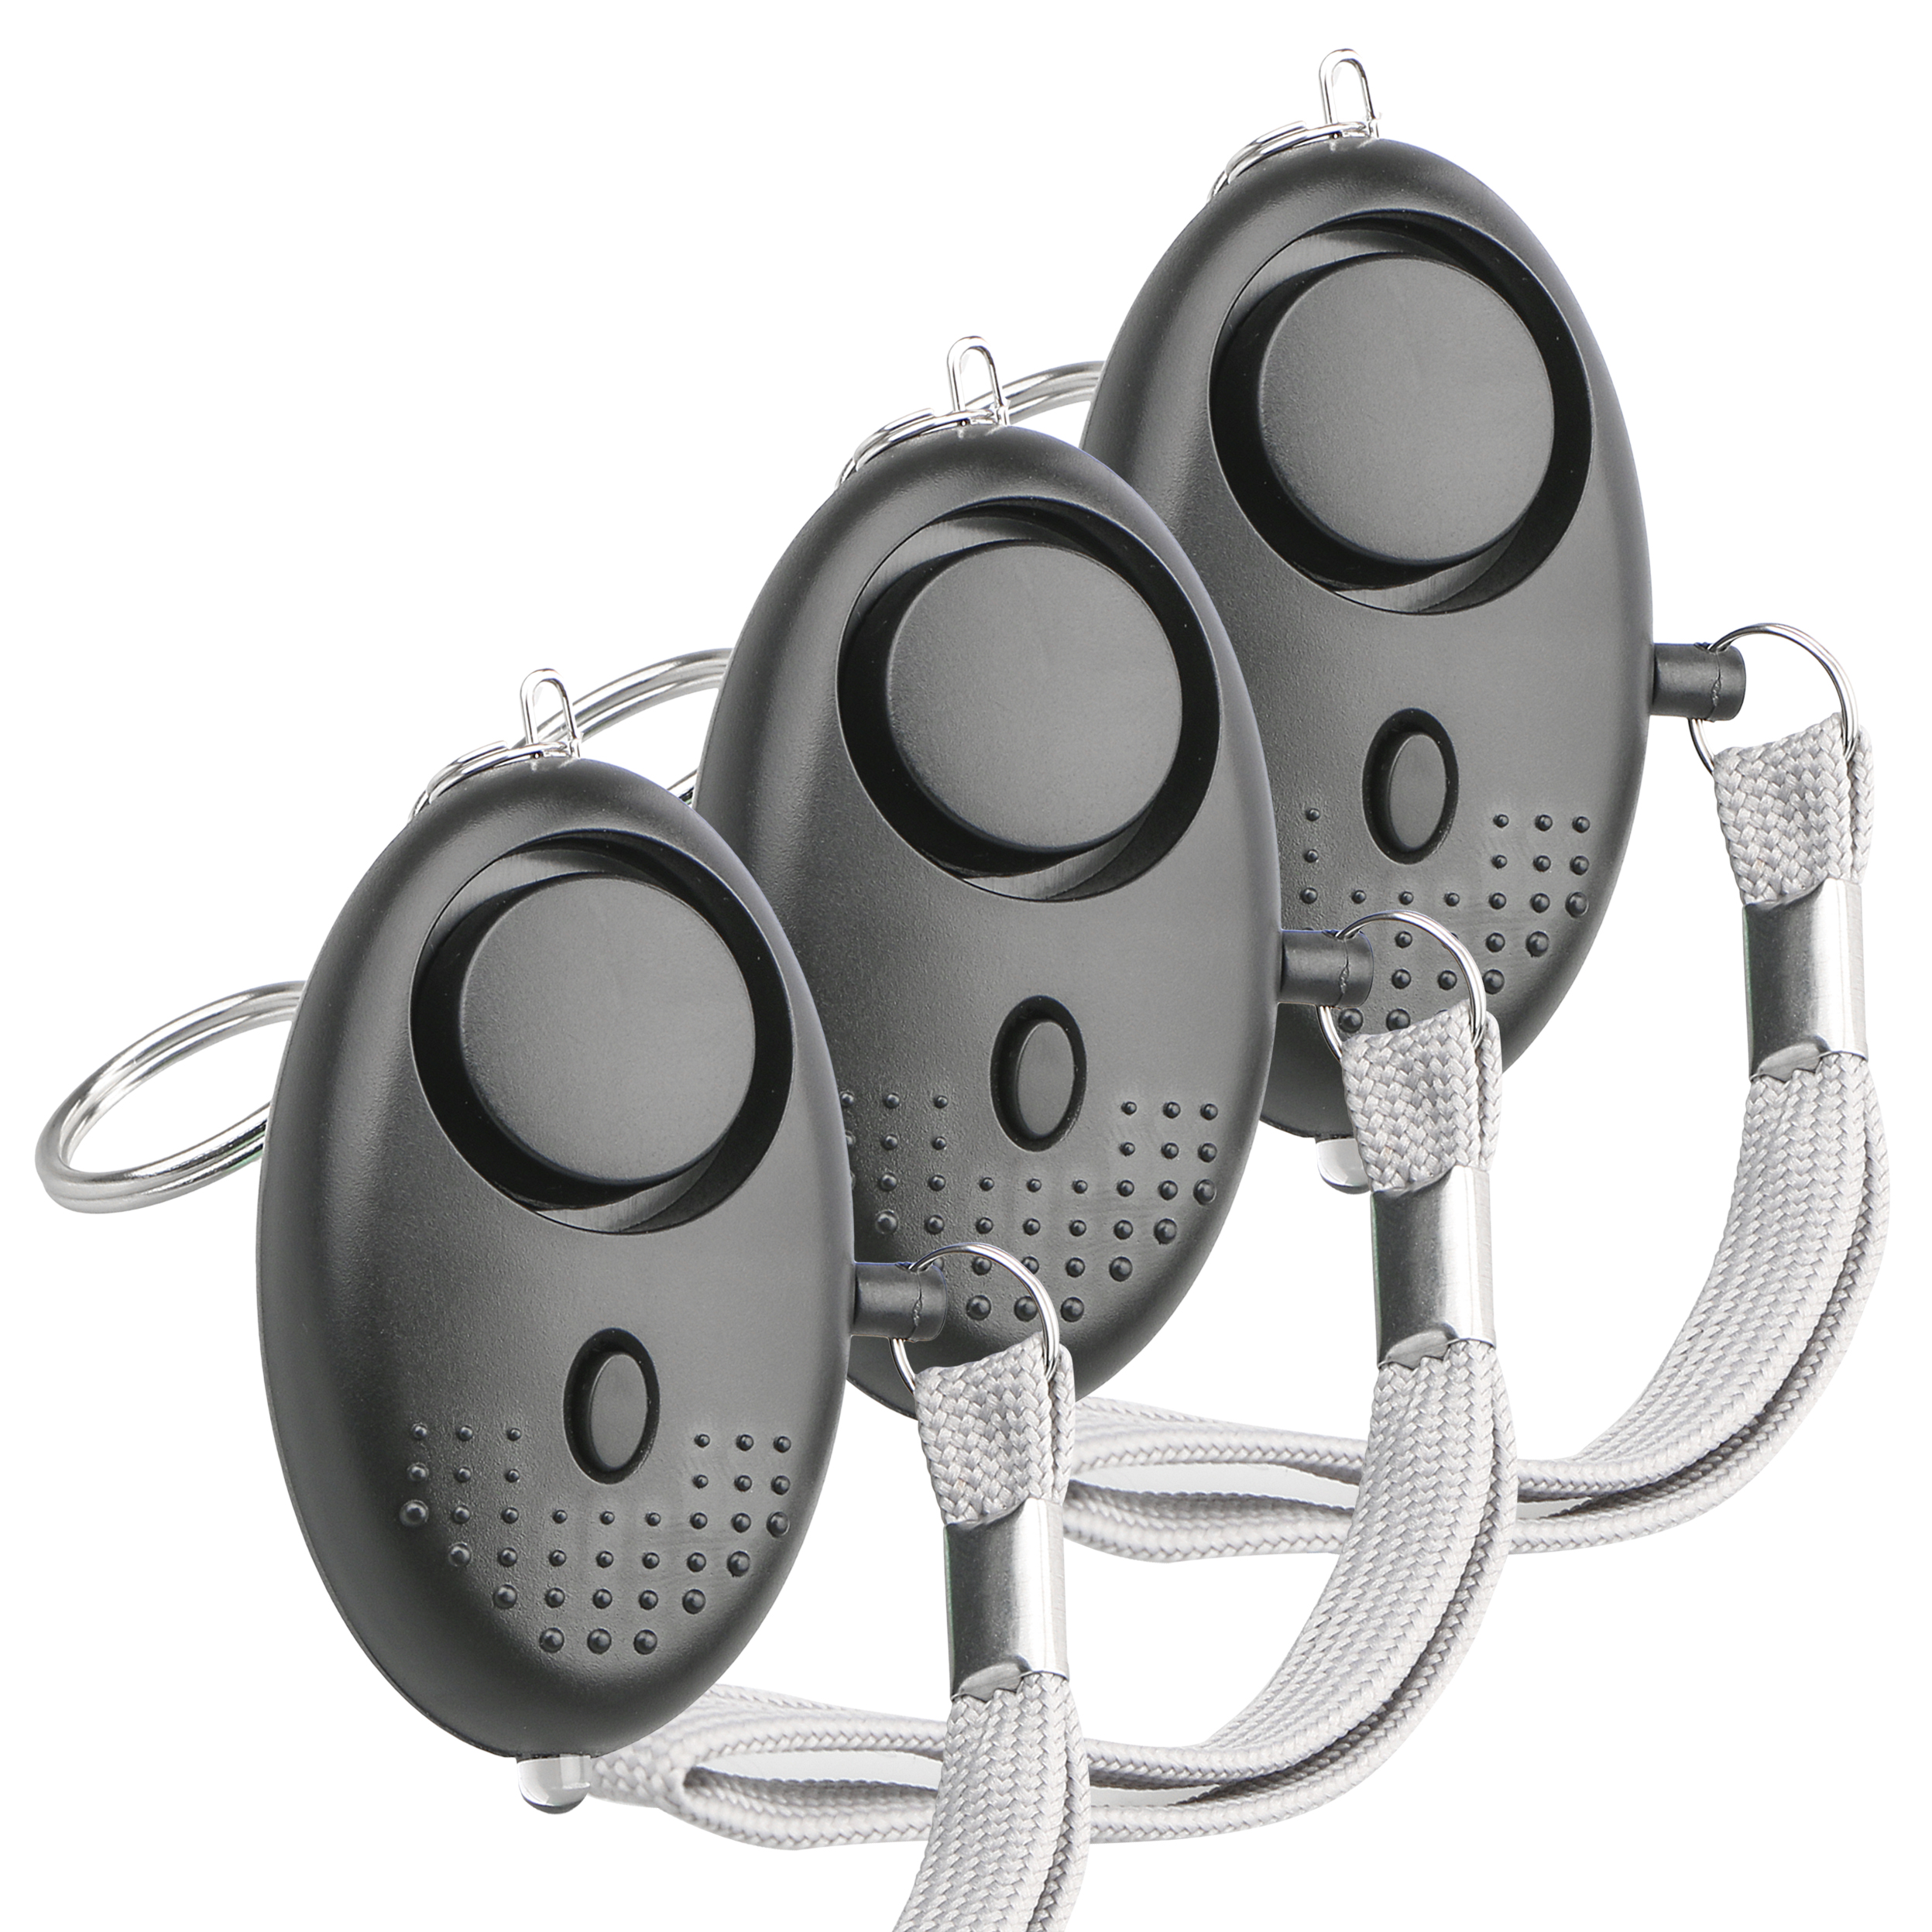 3-Pack Safesound Personal Alarms for Safety